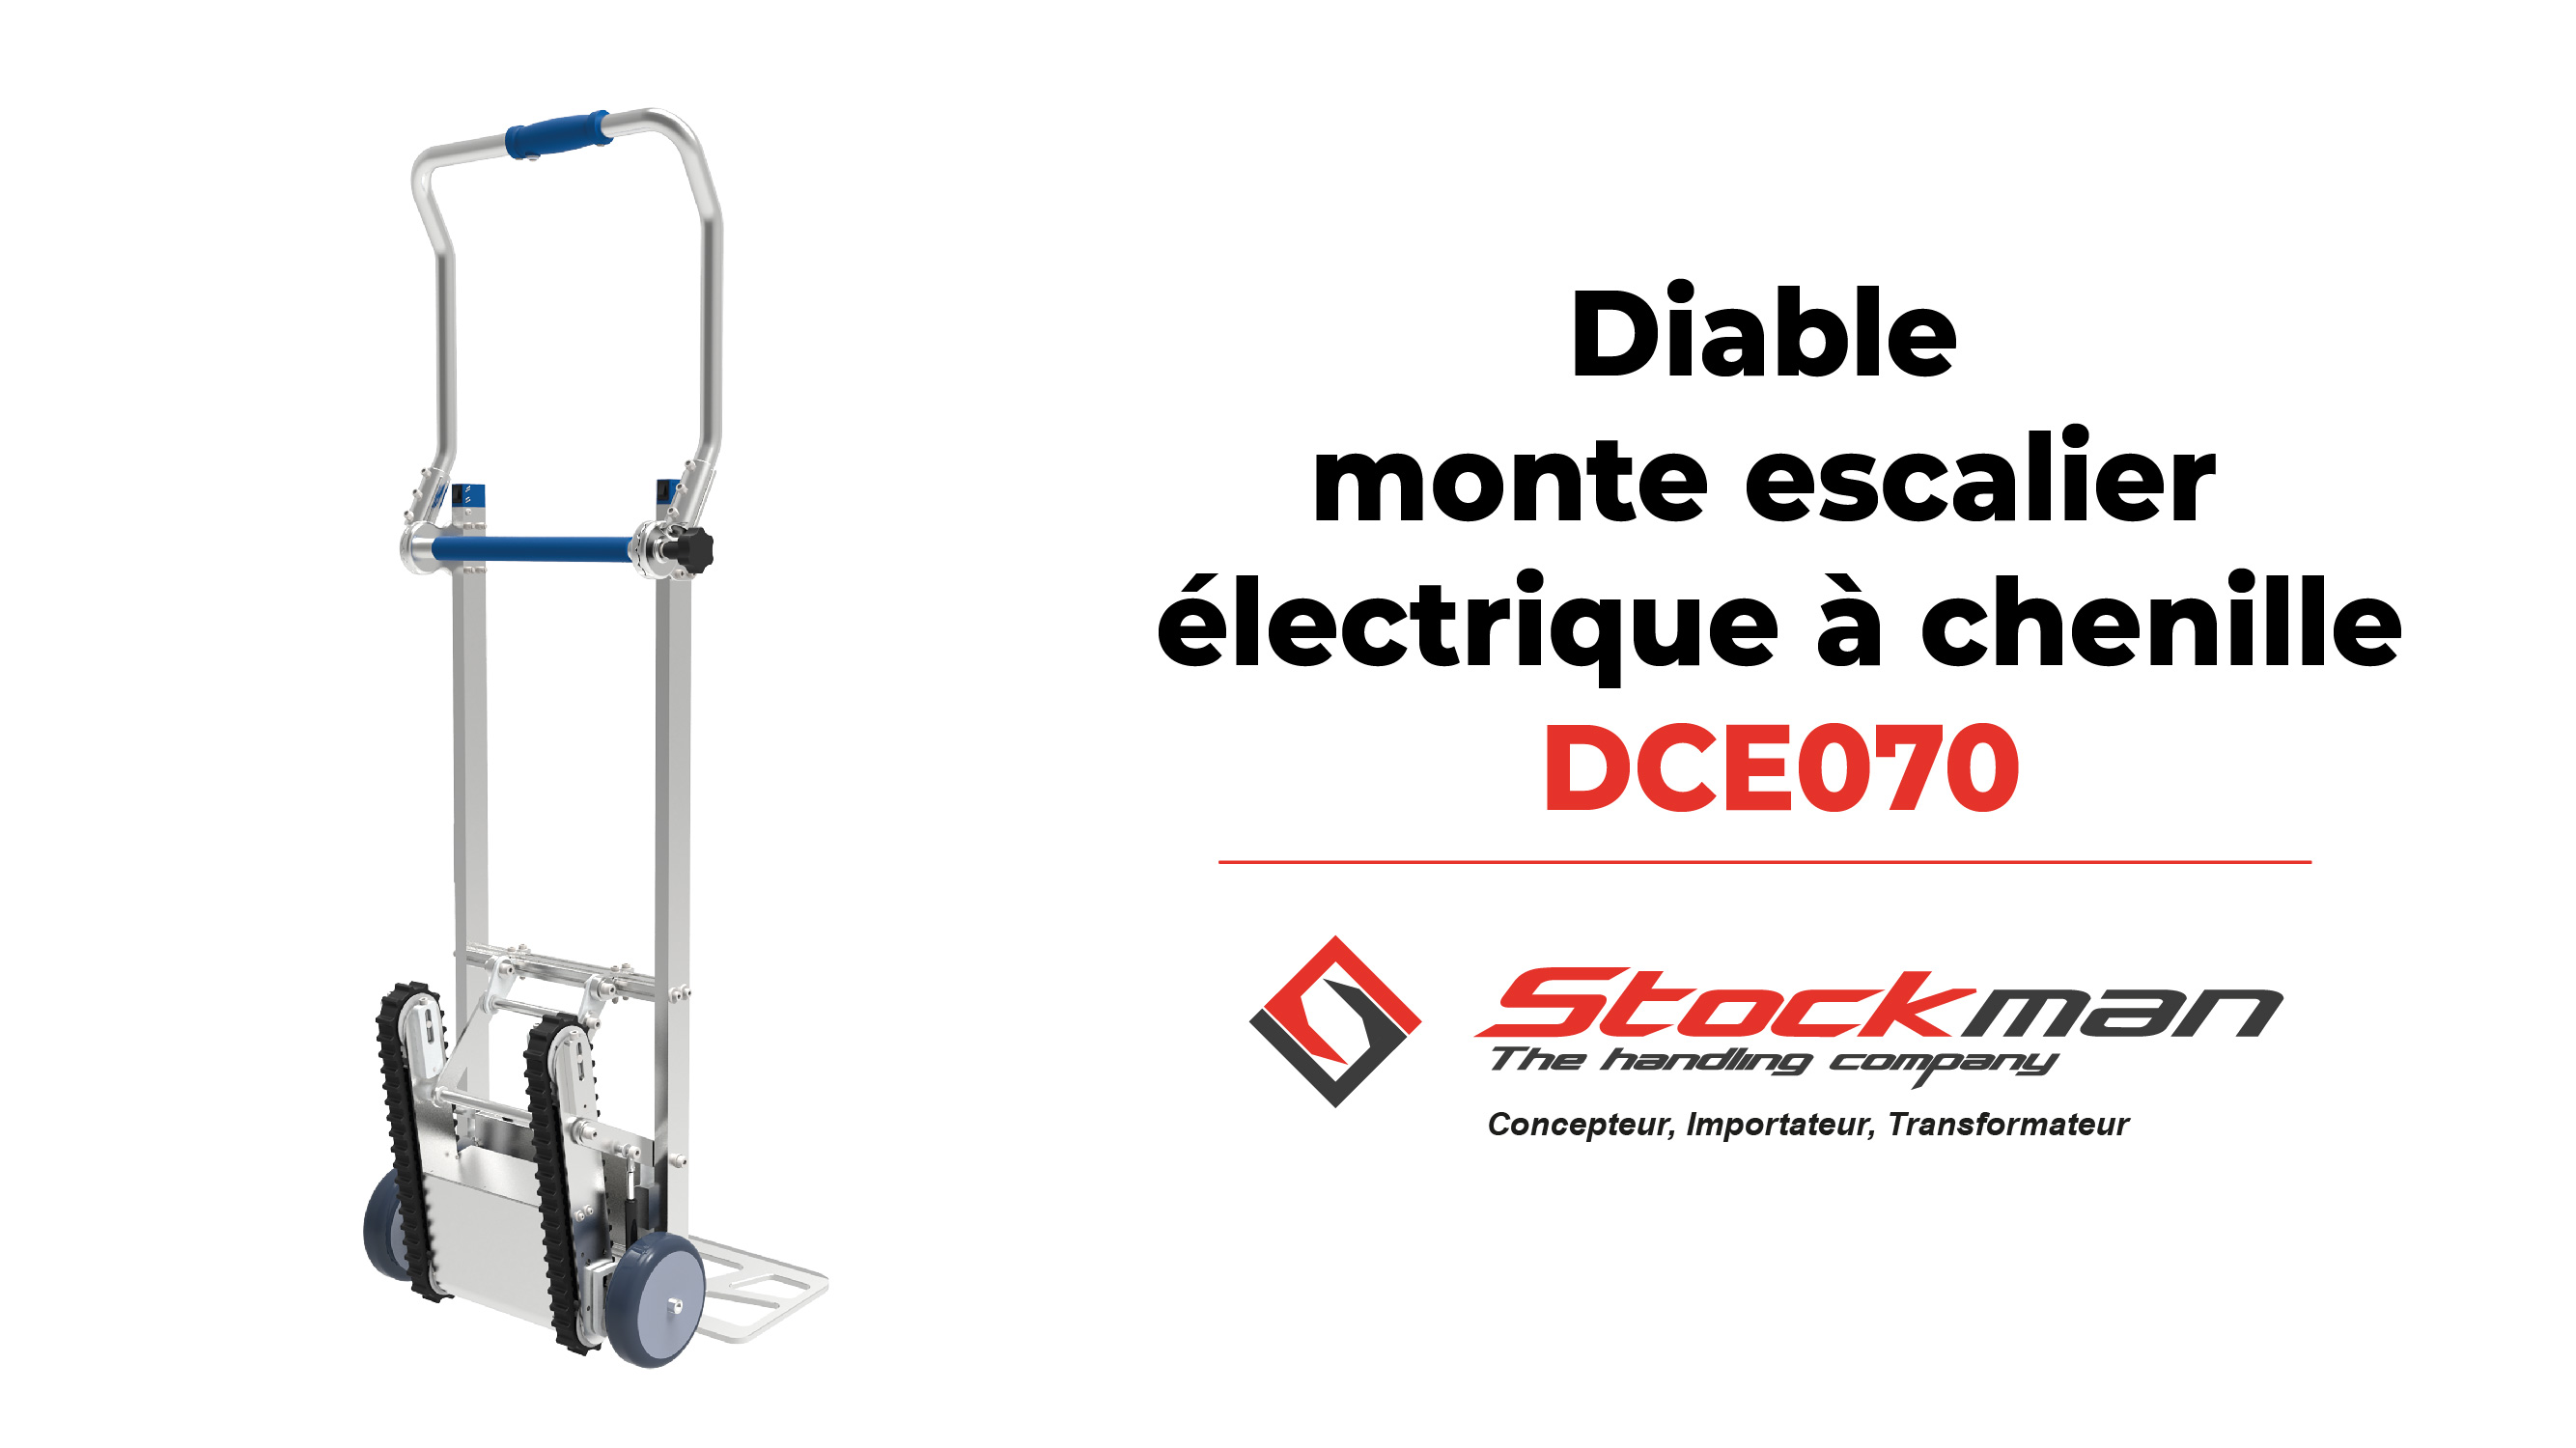 The DCE070: an electric stair climber with crawler tracks